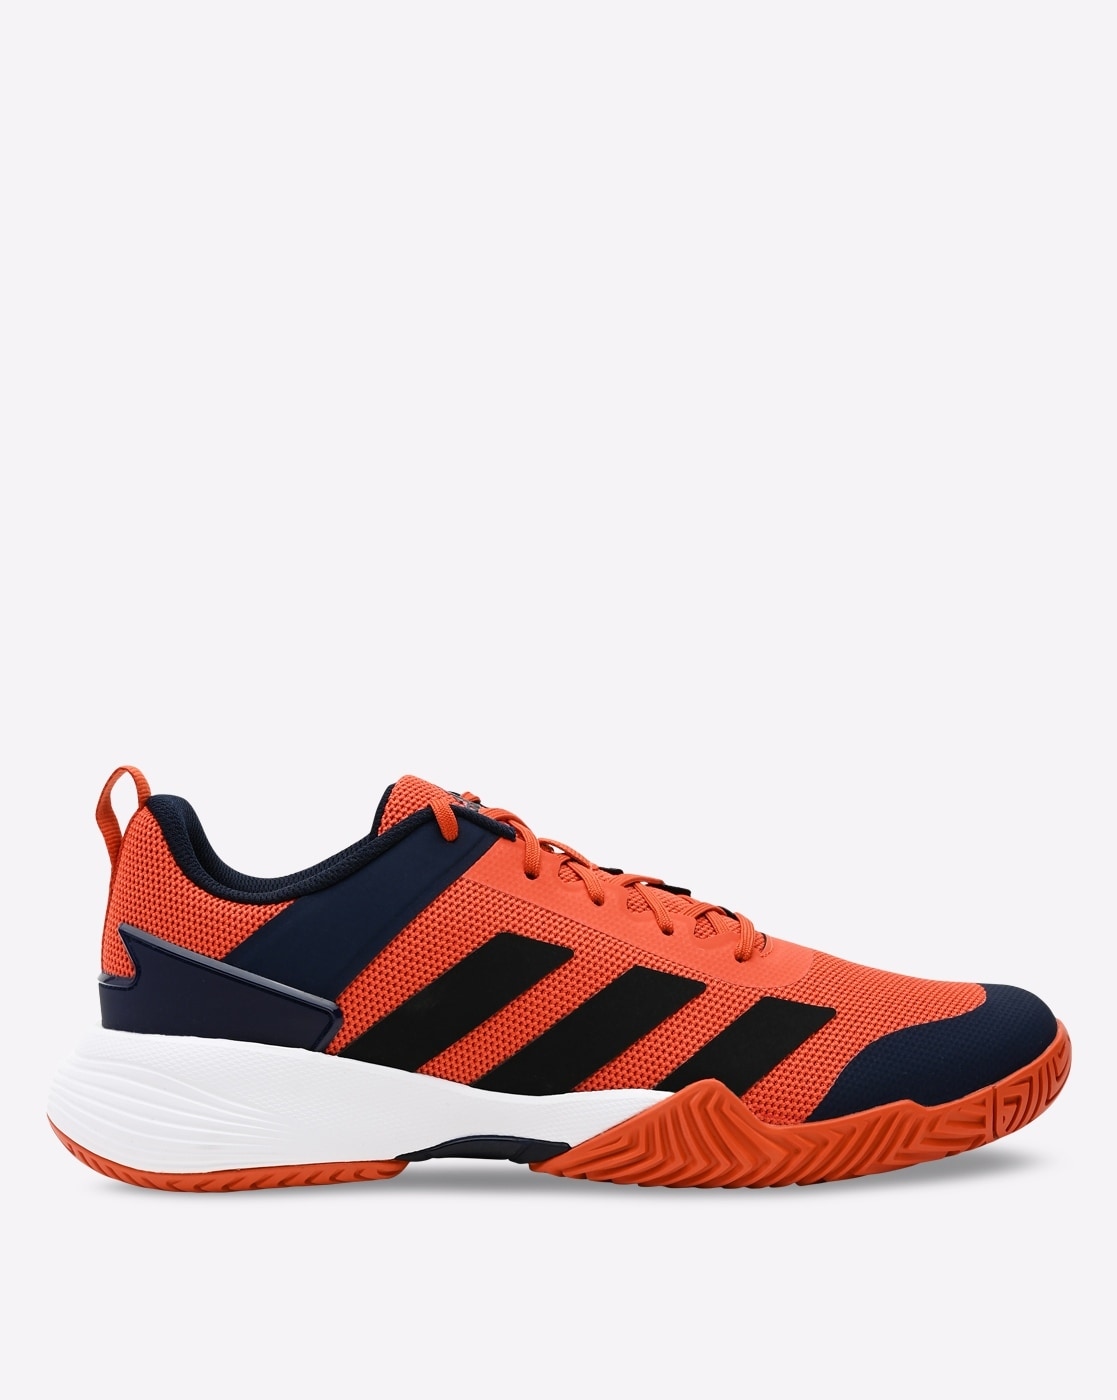 adidas ULTRABOOST DNA SHOES - Red | adidas India